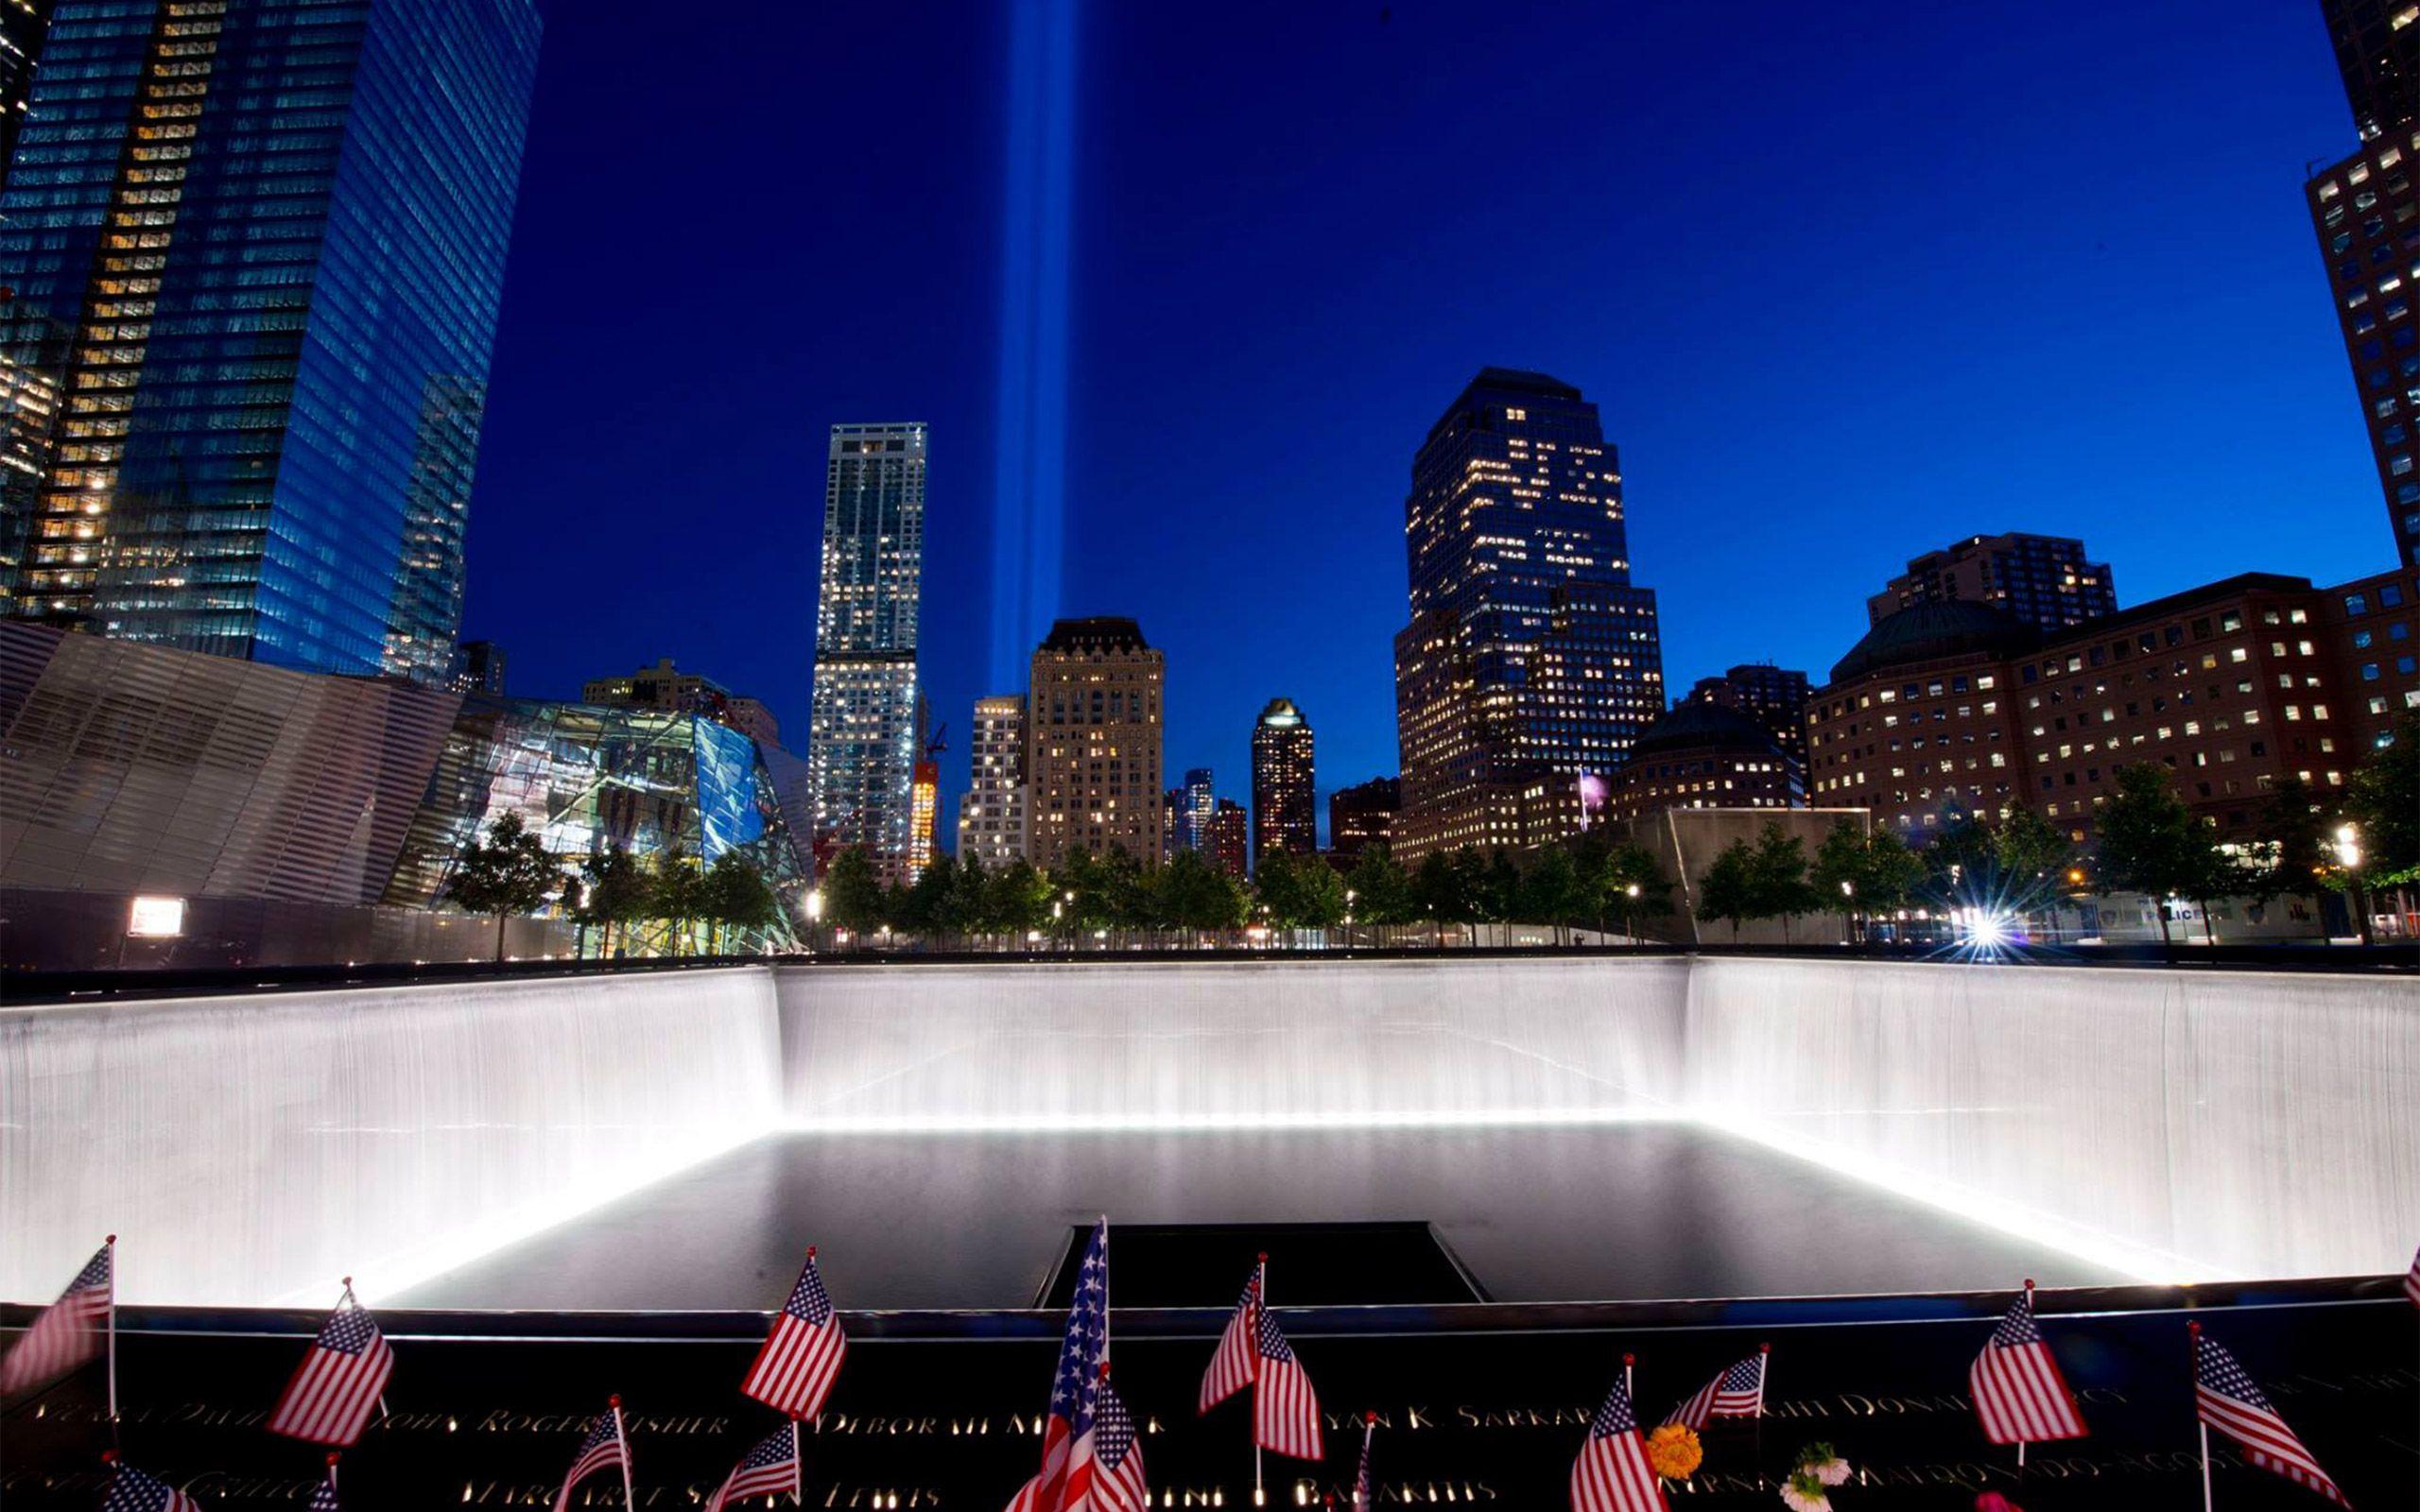 Remembering the Fallen: 15th anniversary of September 11th